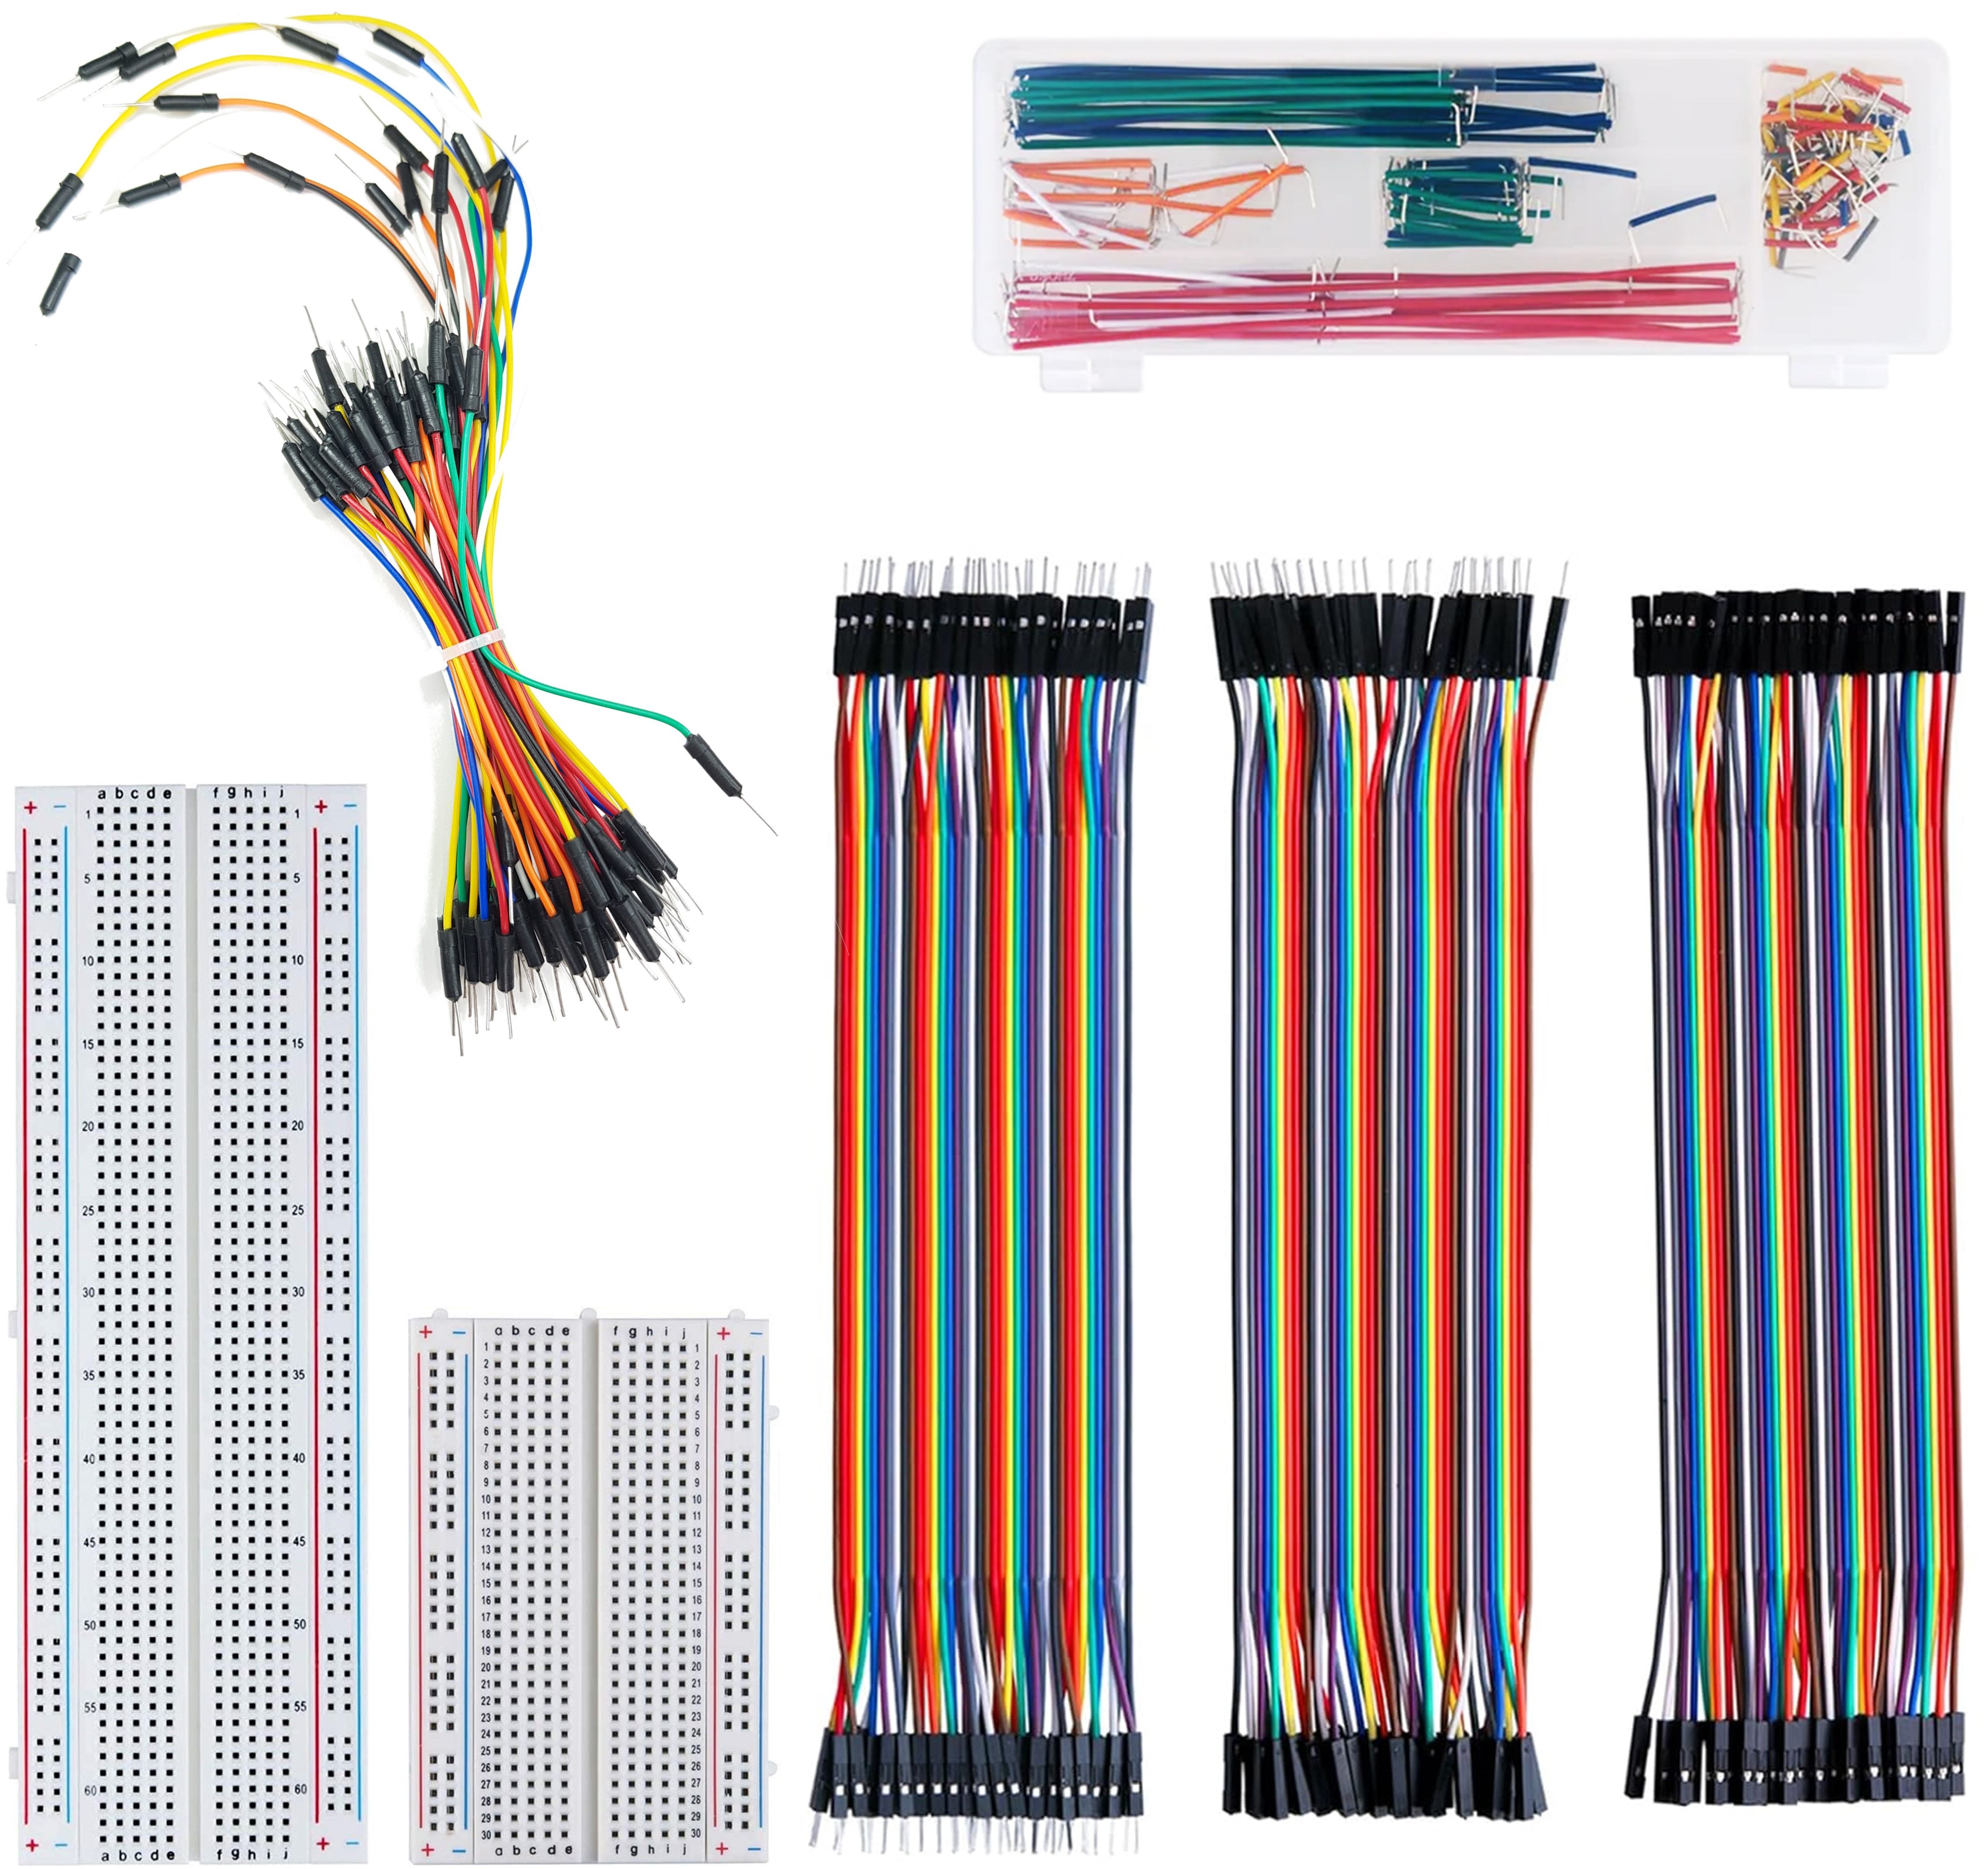 Jumper Wires and Breadboard Kit for Arduino, ESP32, ESP8266, Raspberry Pi